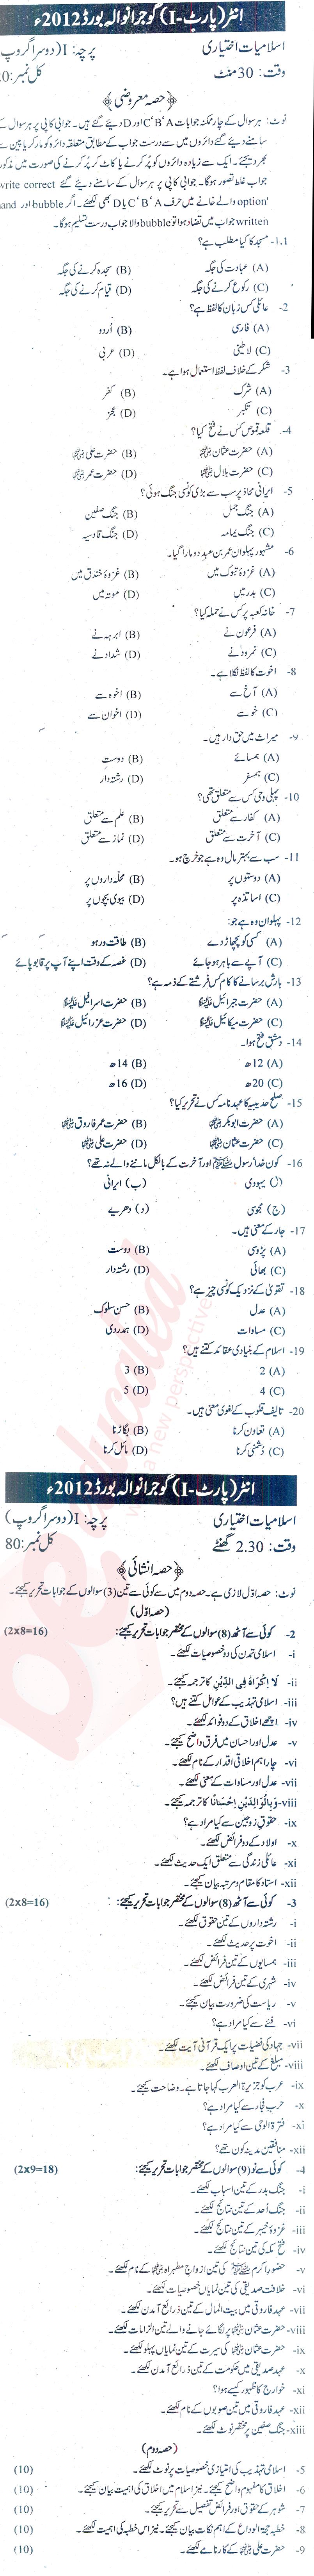 Islamiat Elective FA Part 1 Past Paper Group 2 BISE Gujranwala 2012